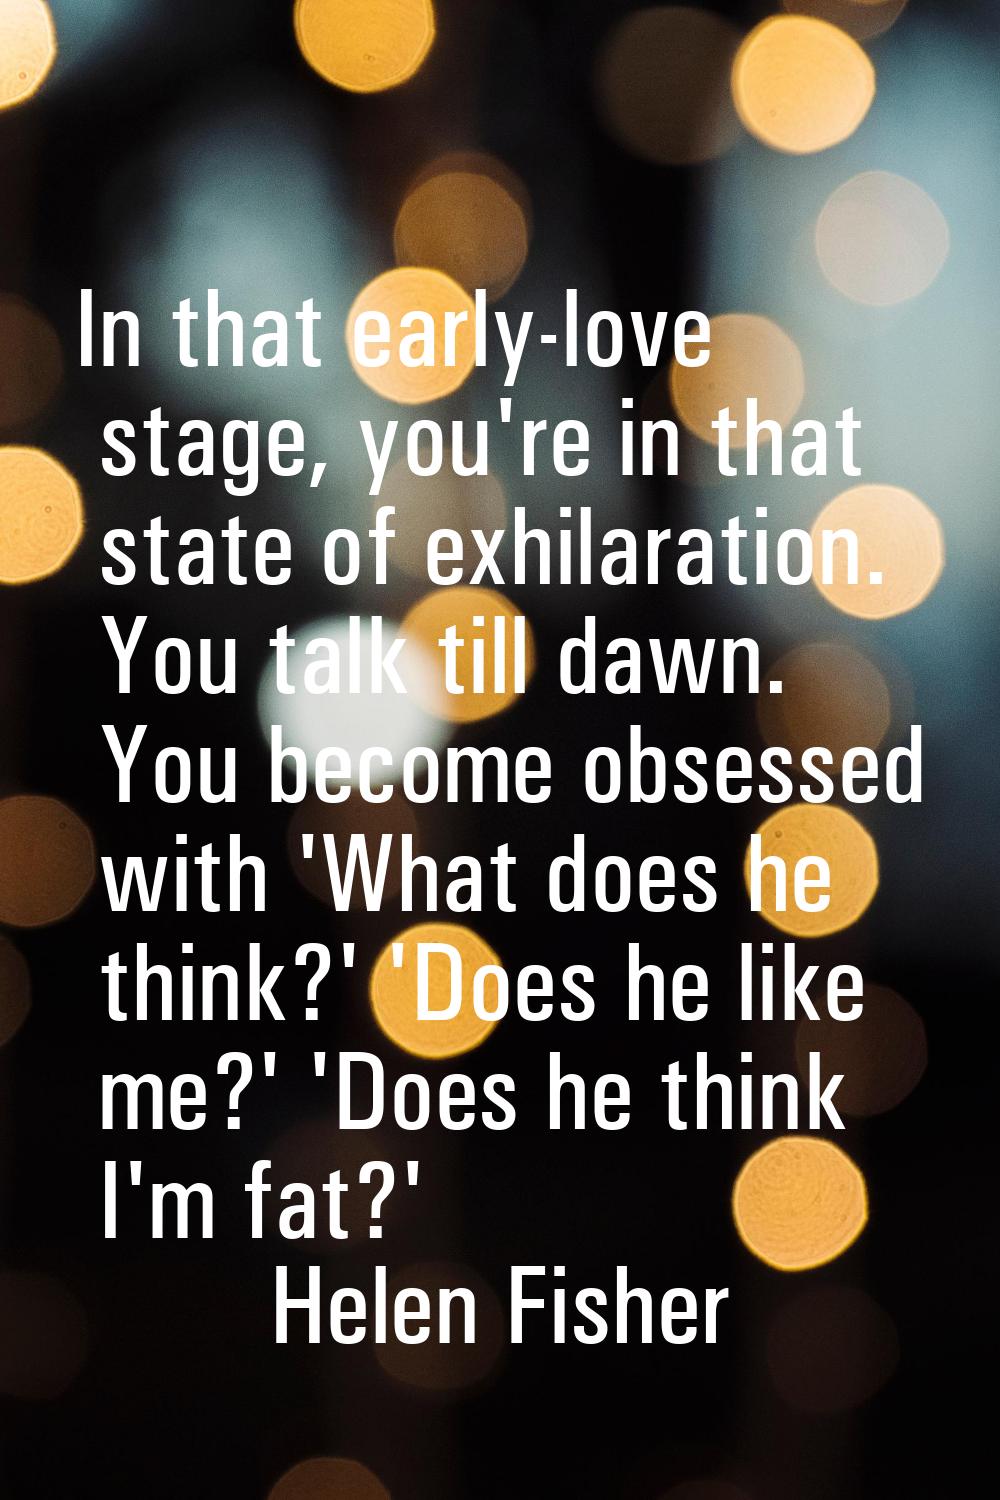 In that early-love stage, you're in that state of exhilaration. You talk till dawn. You become obse